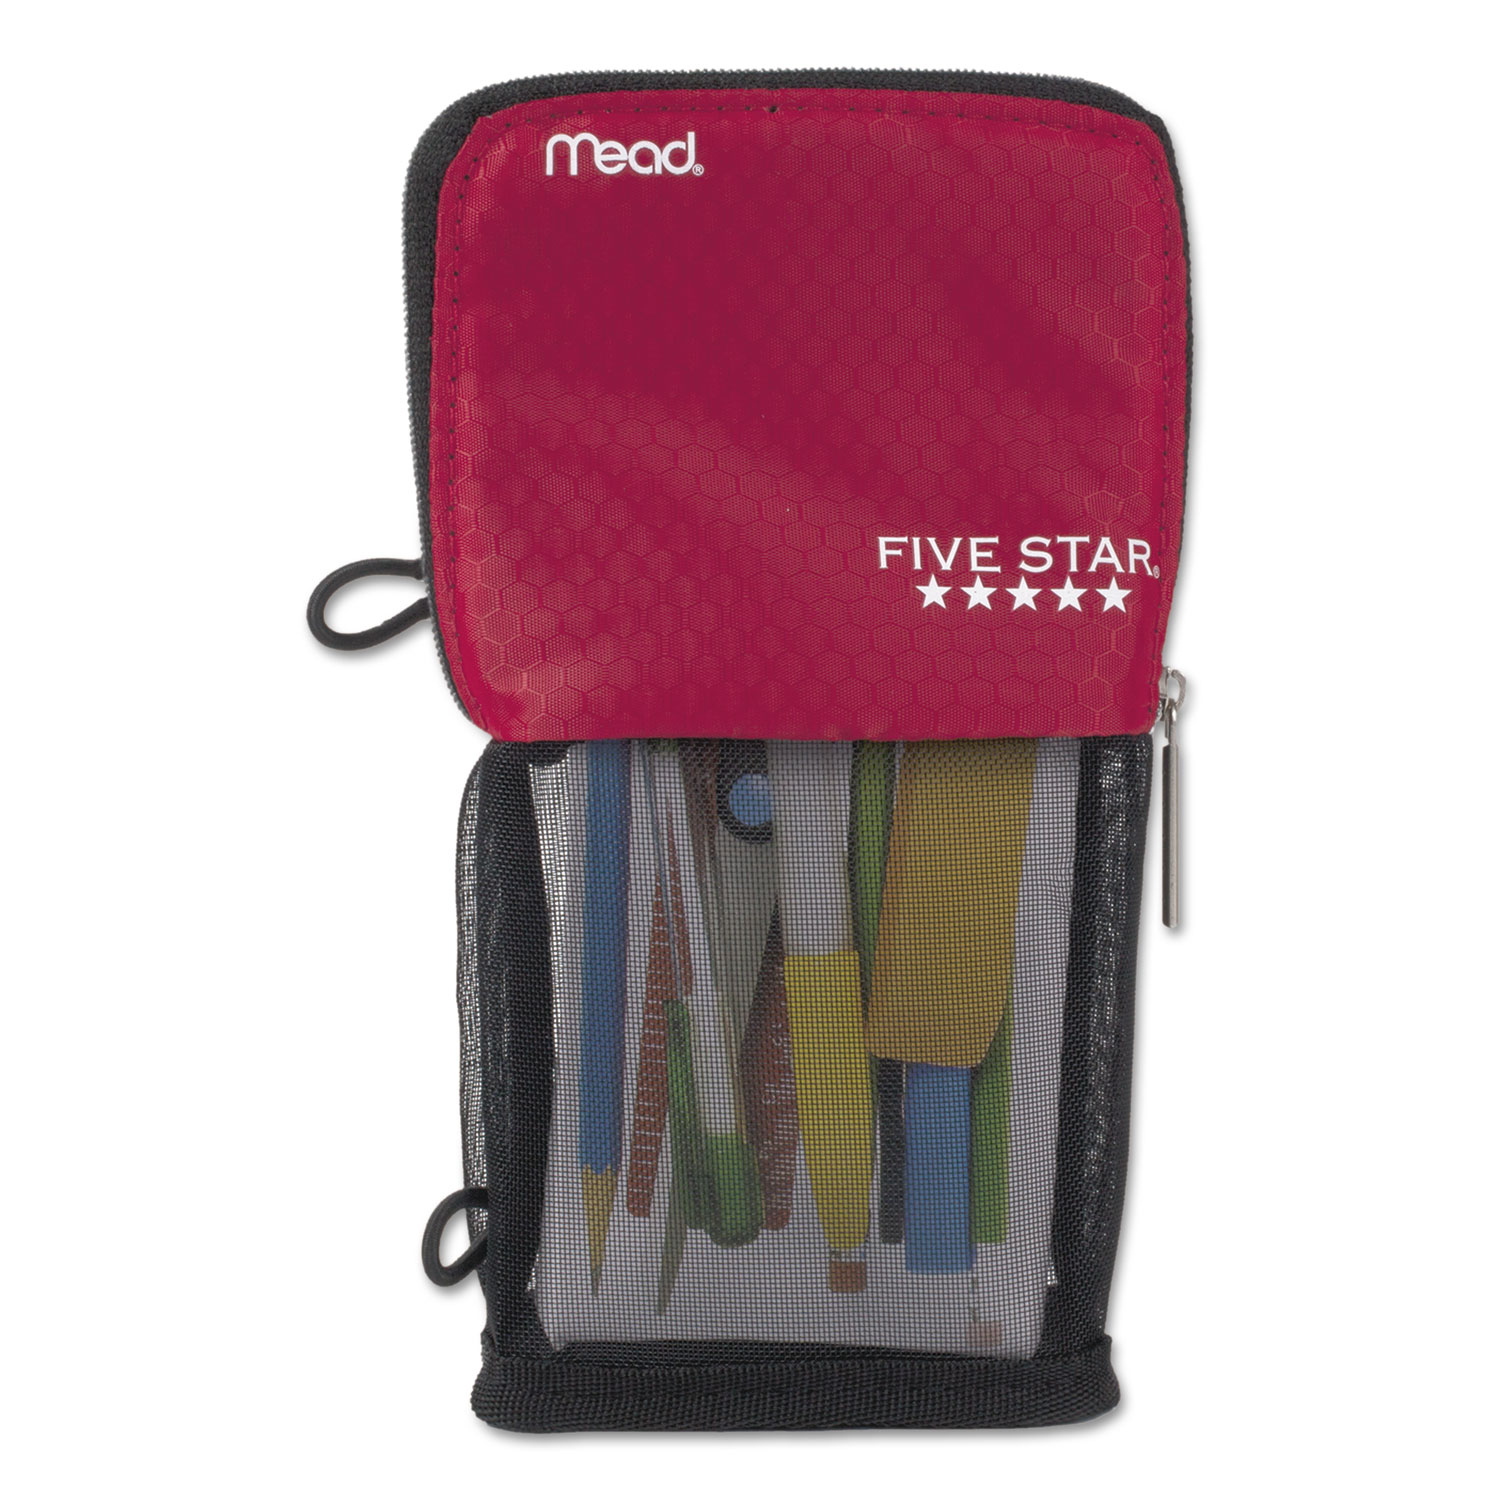 Stand 'N Store Pencil Pouch, 4 1/2 x 8, Red